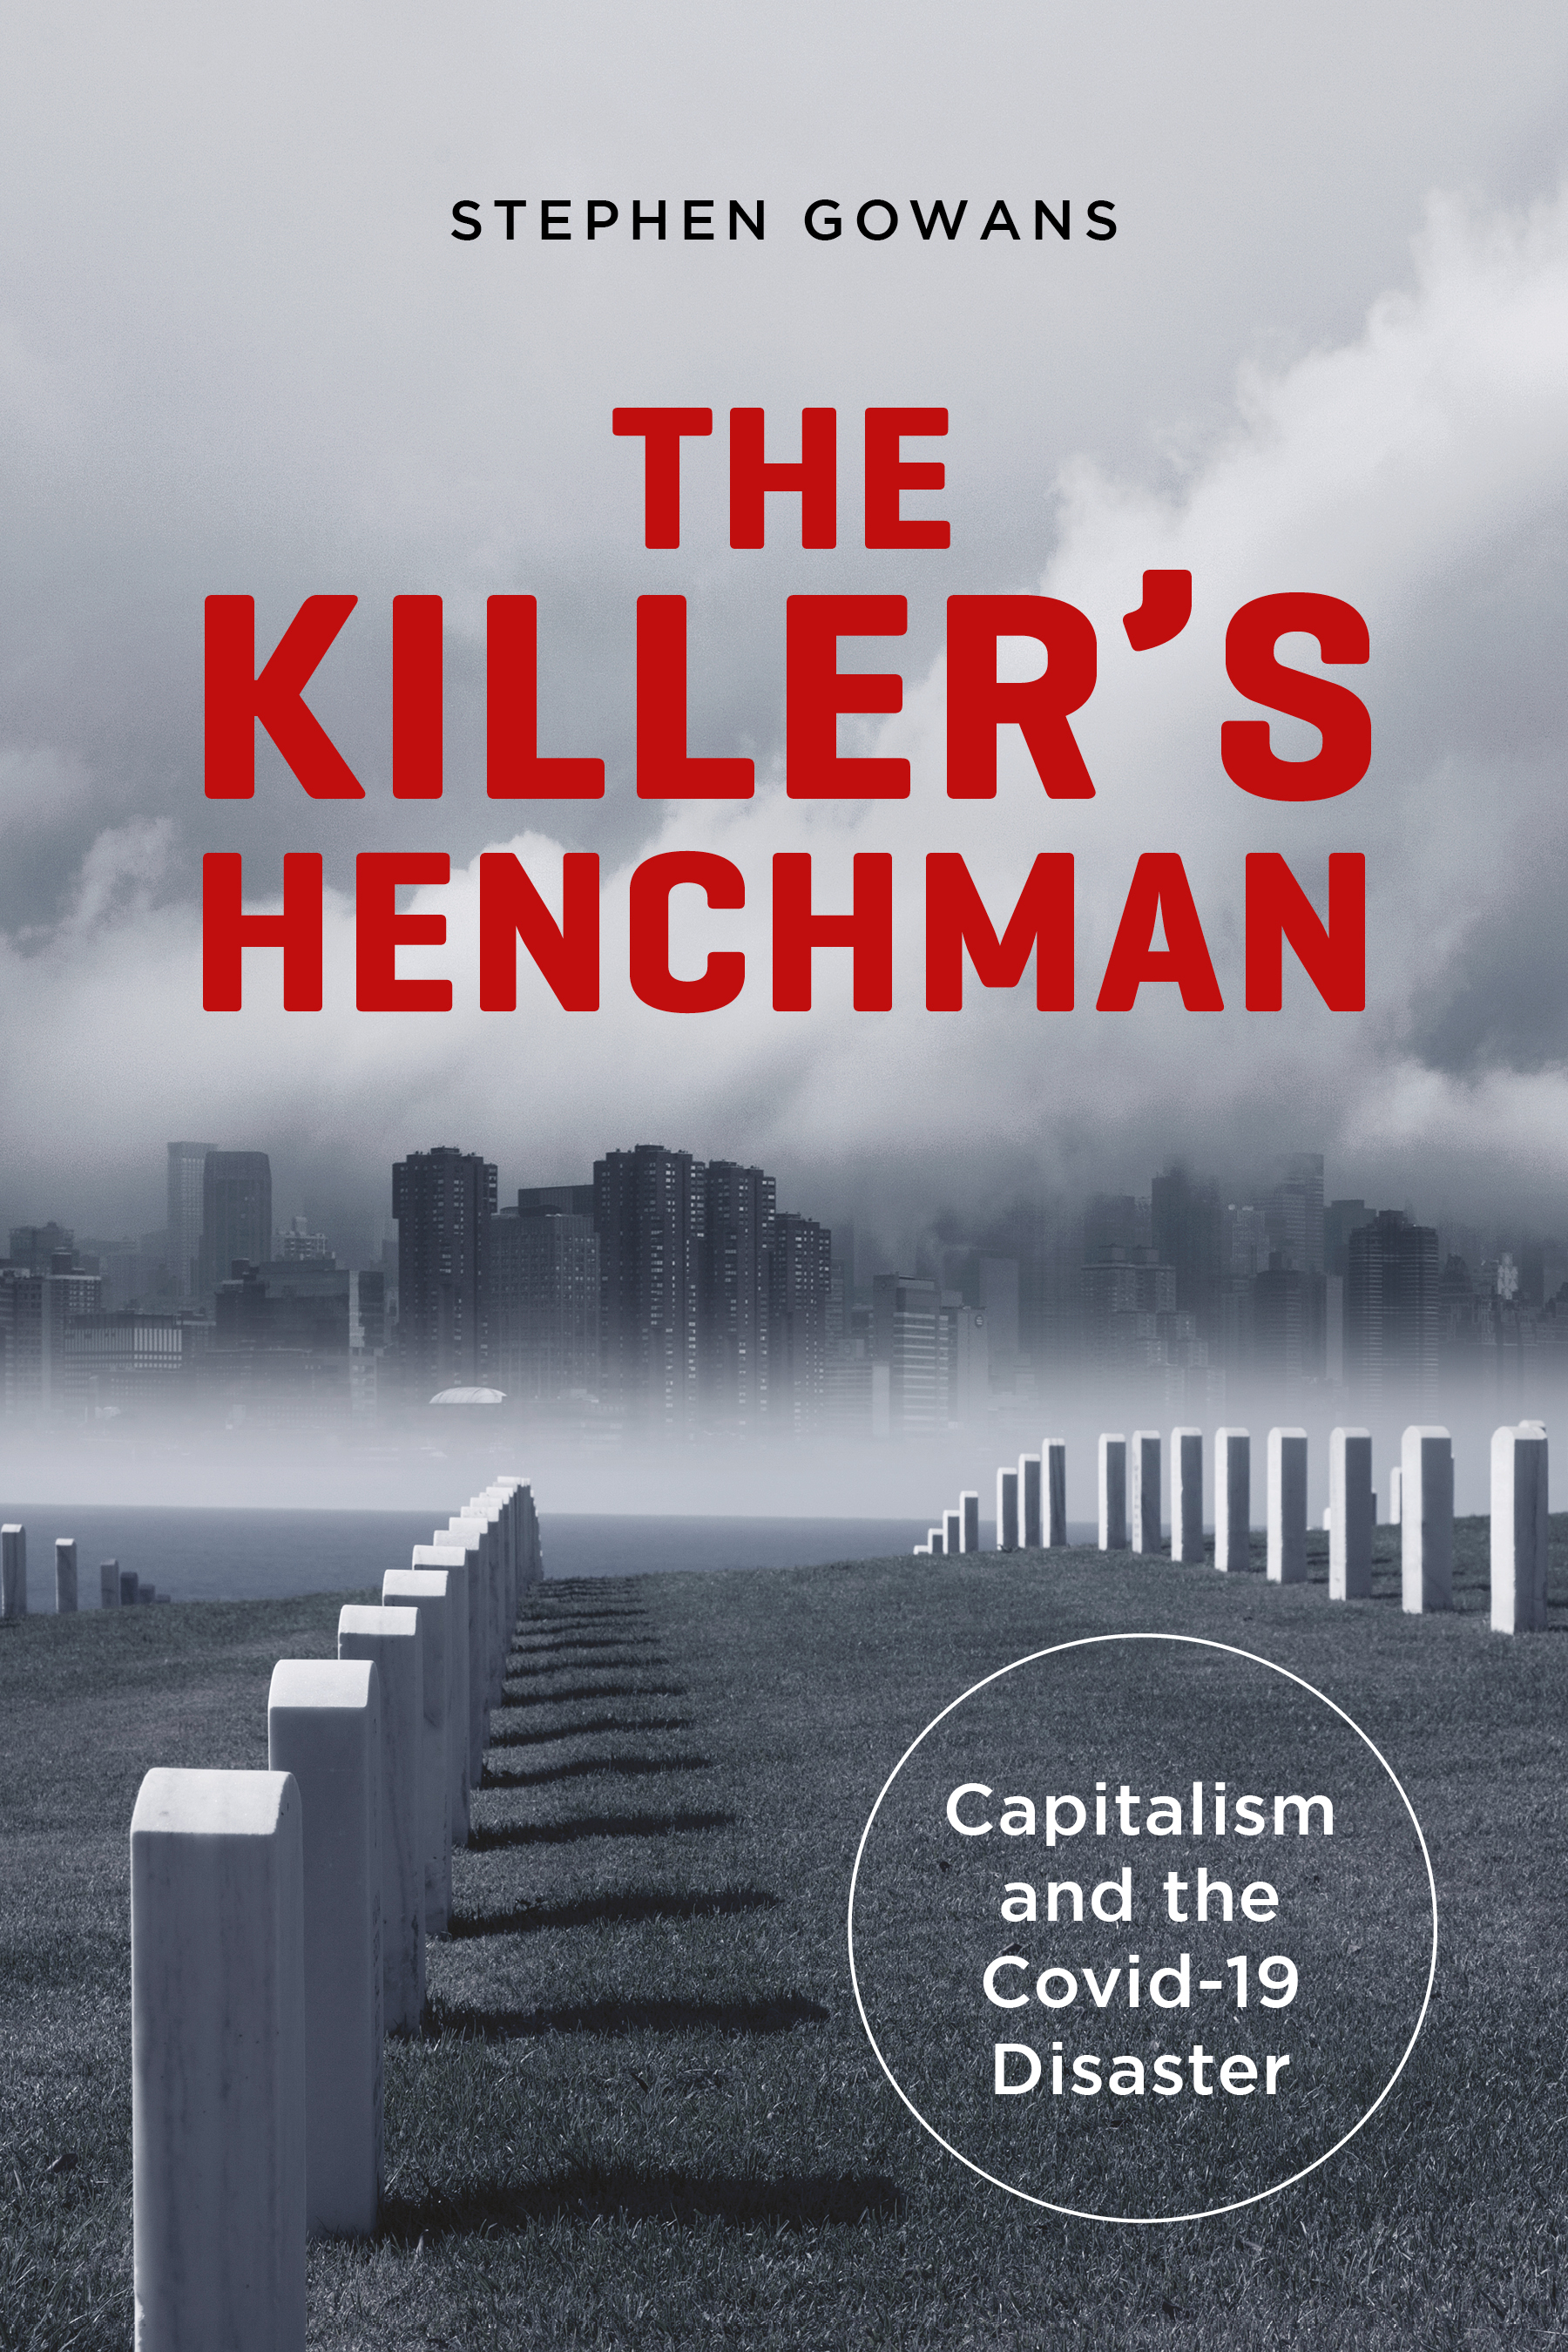 THE KILLER’S HENCHMAN, Capitalism and the Covid-19 Disaster